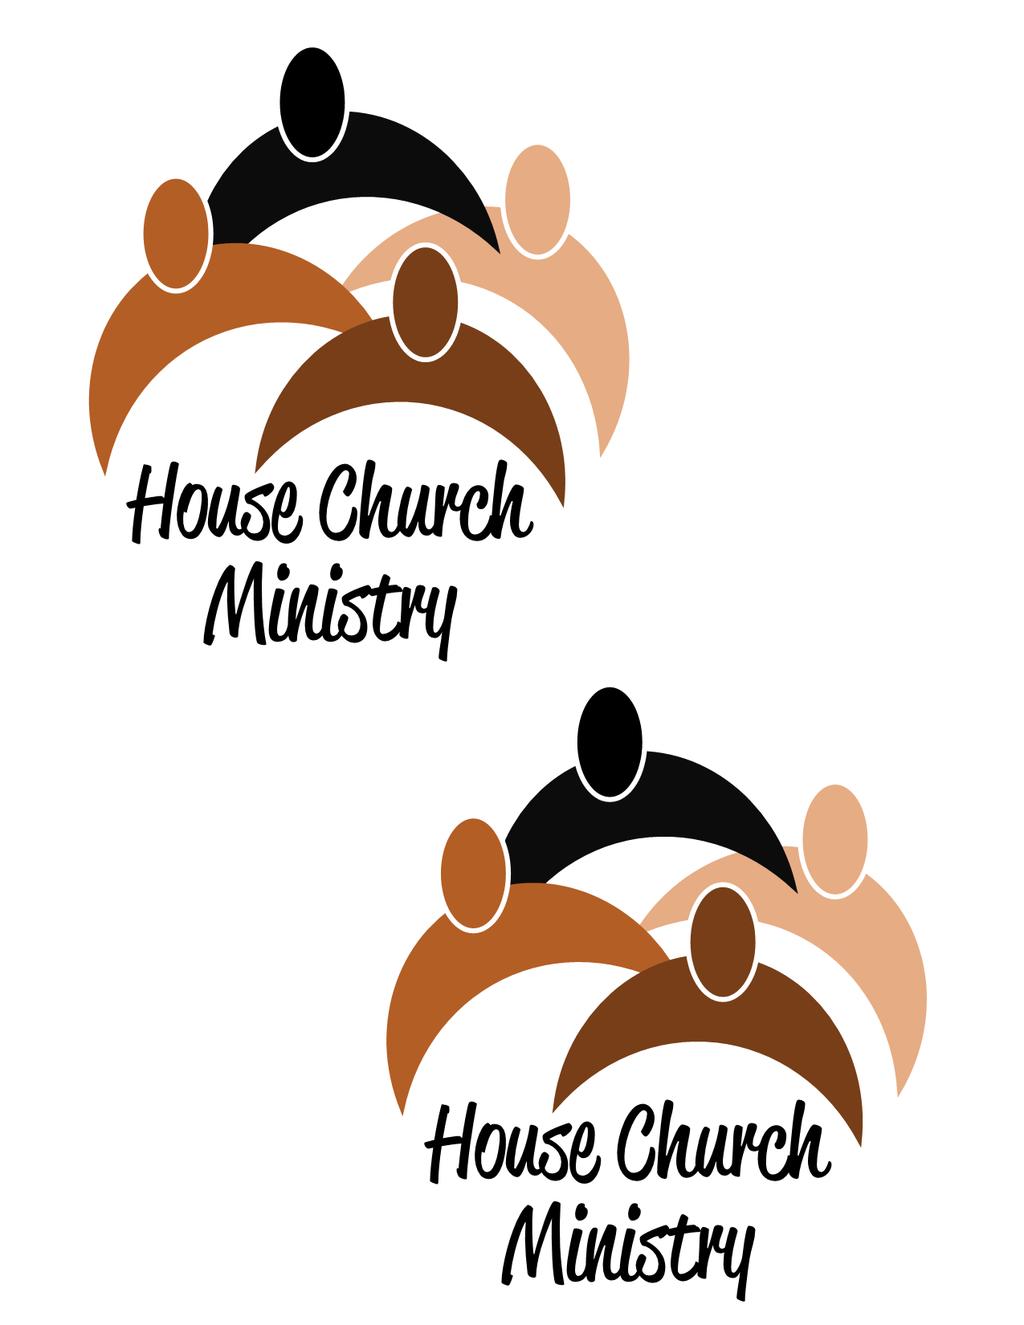 The House Church Ministry is the place where pastoral and diaconal care and discipleship is provided.